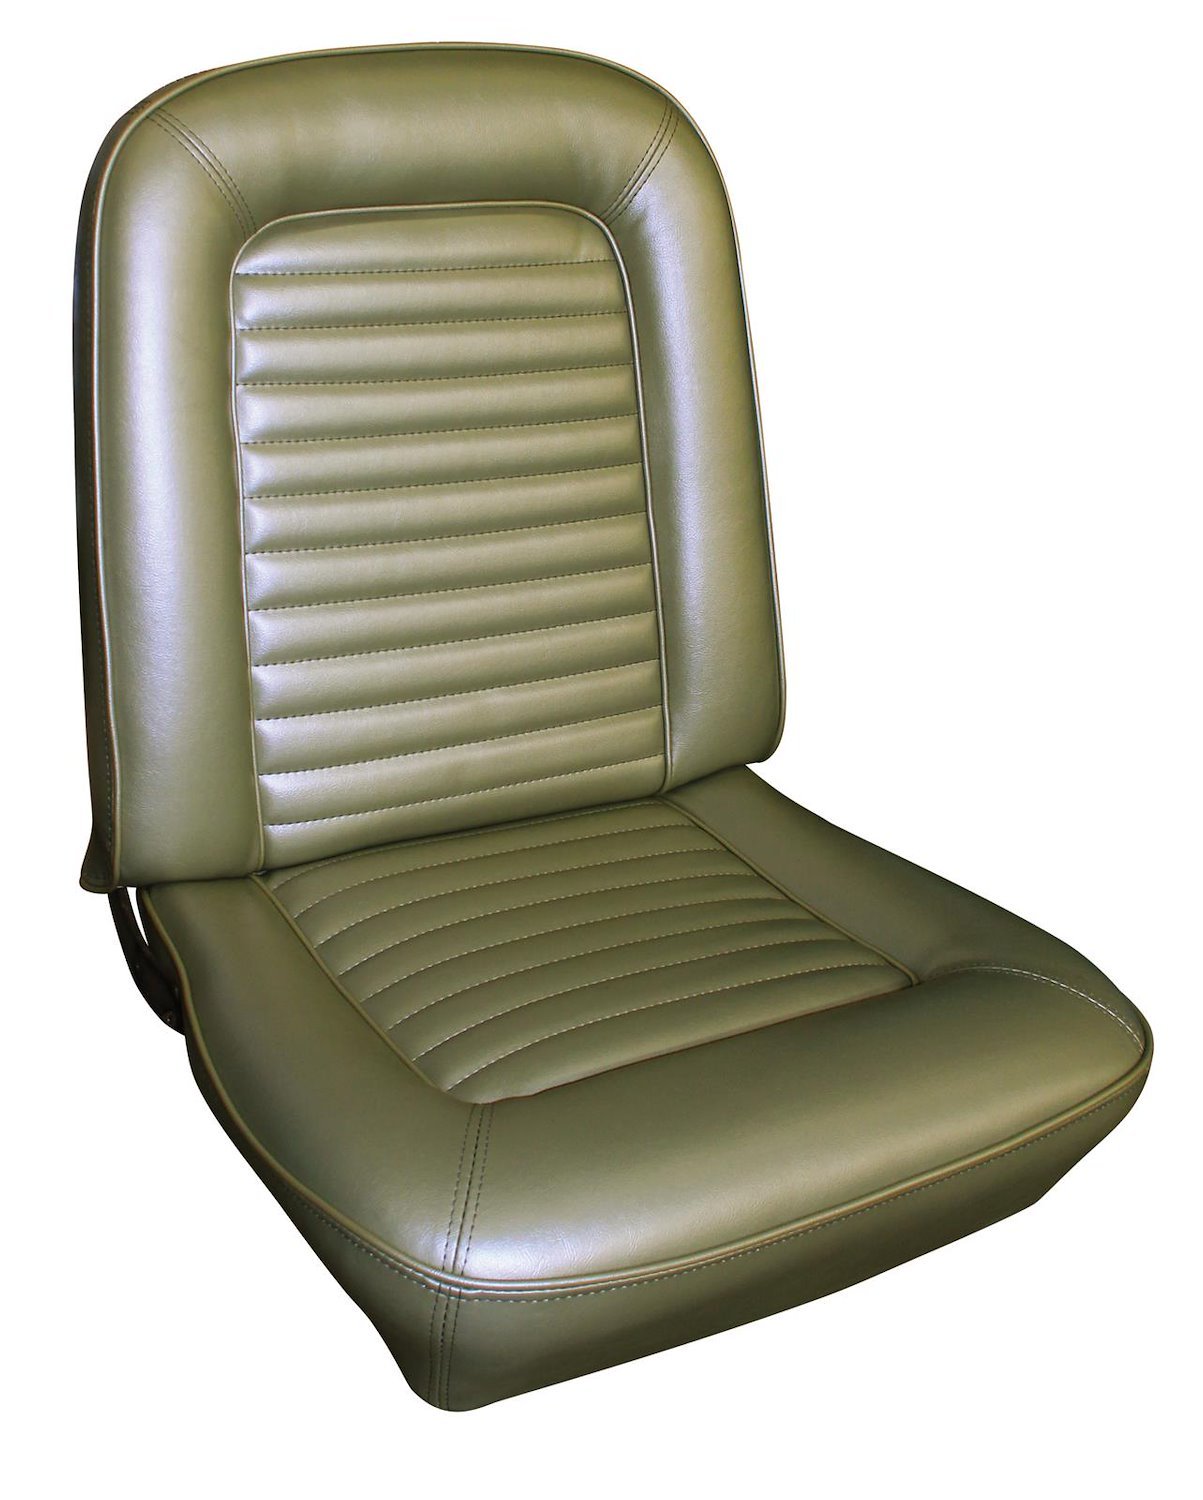 1968 Ford Mustang Deluxe Interior Front Bench Seat